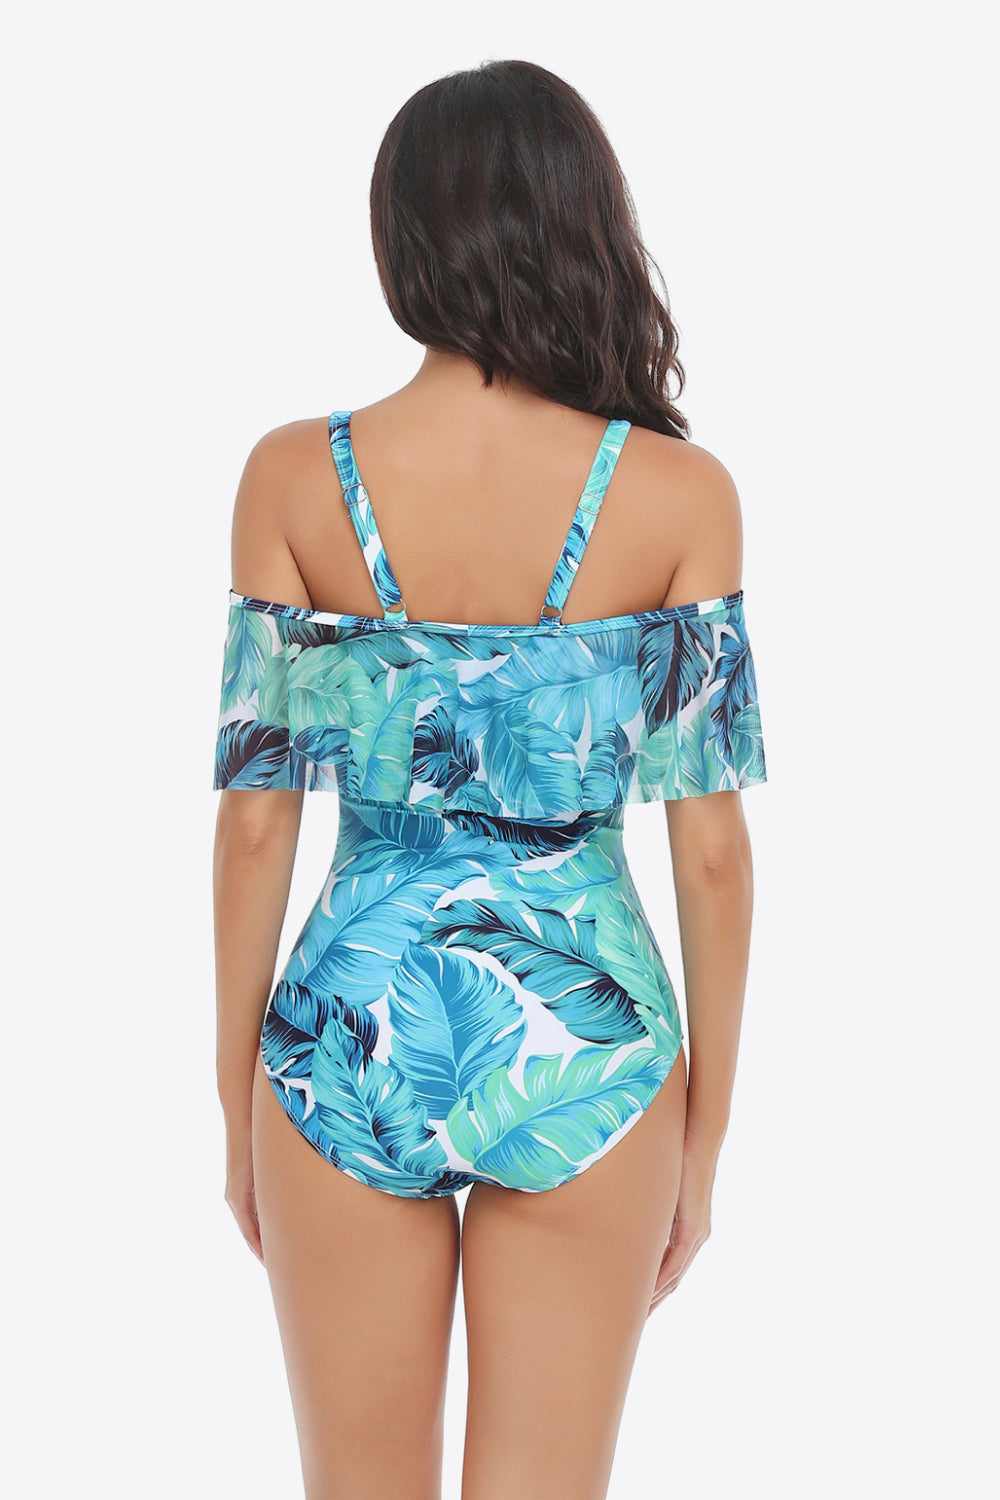 Sunset and Swim Botanical Print Cold-Shoulder Layered One-Piece Swimsuit  Sunset and Swim   